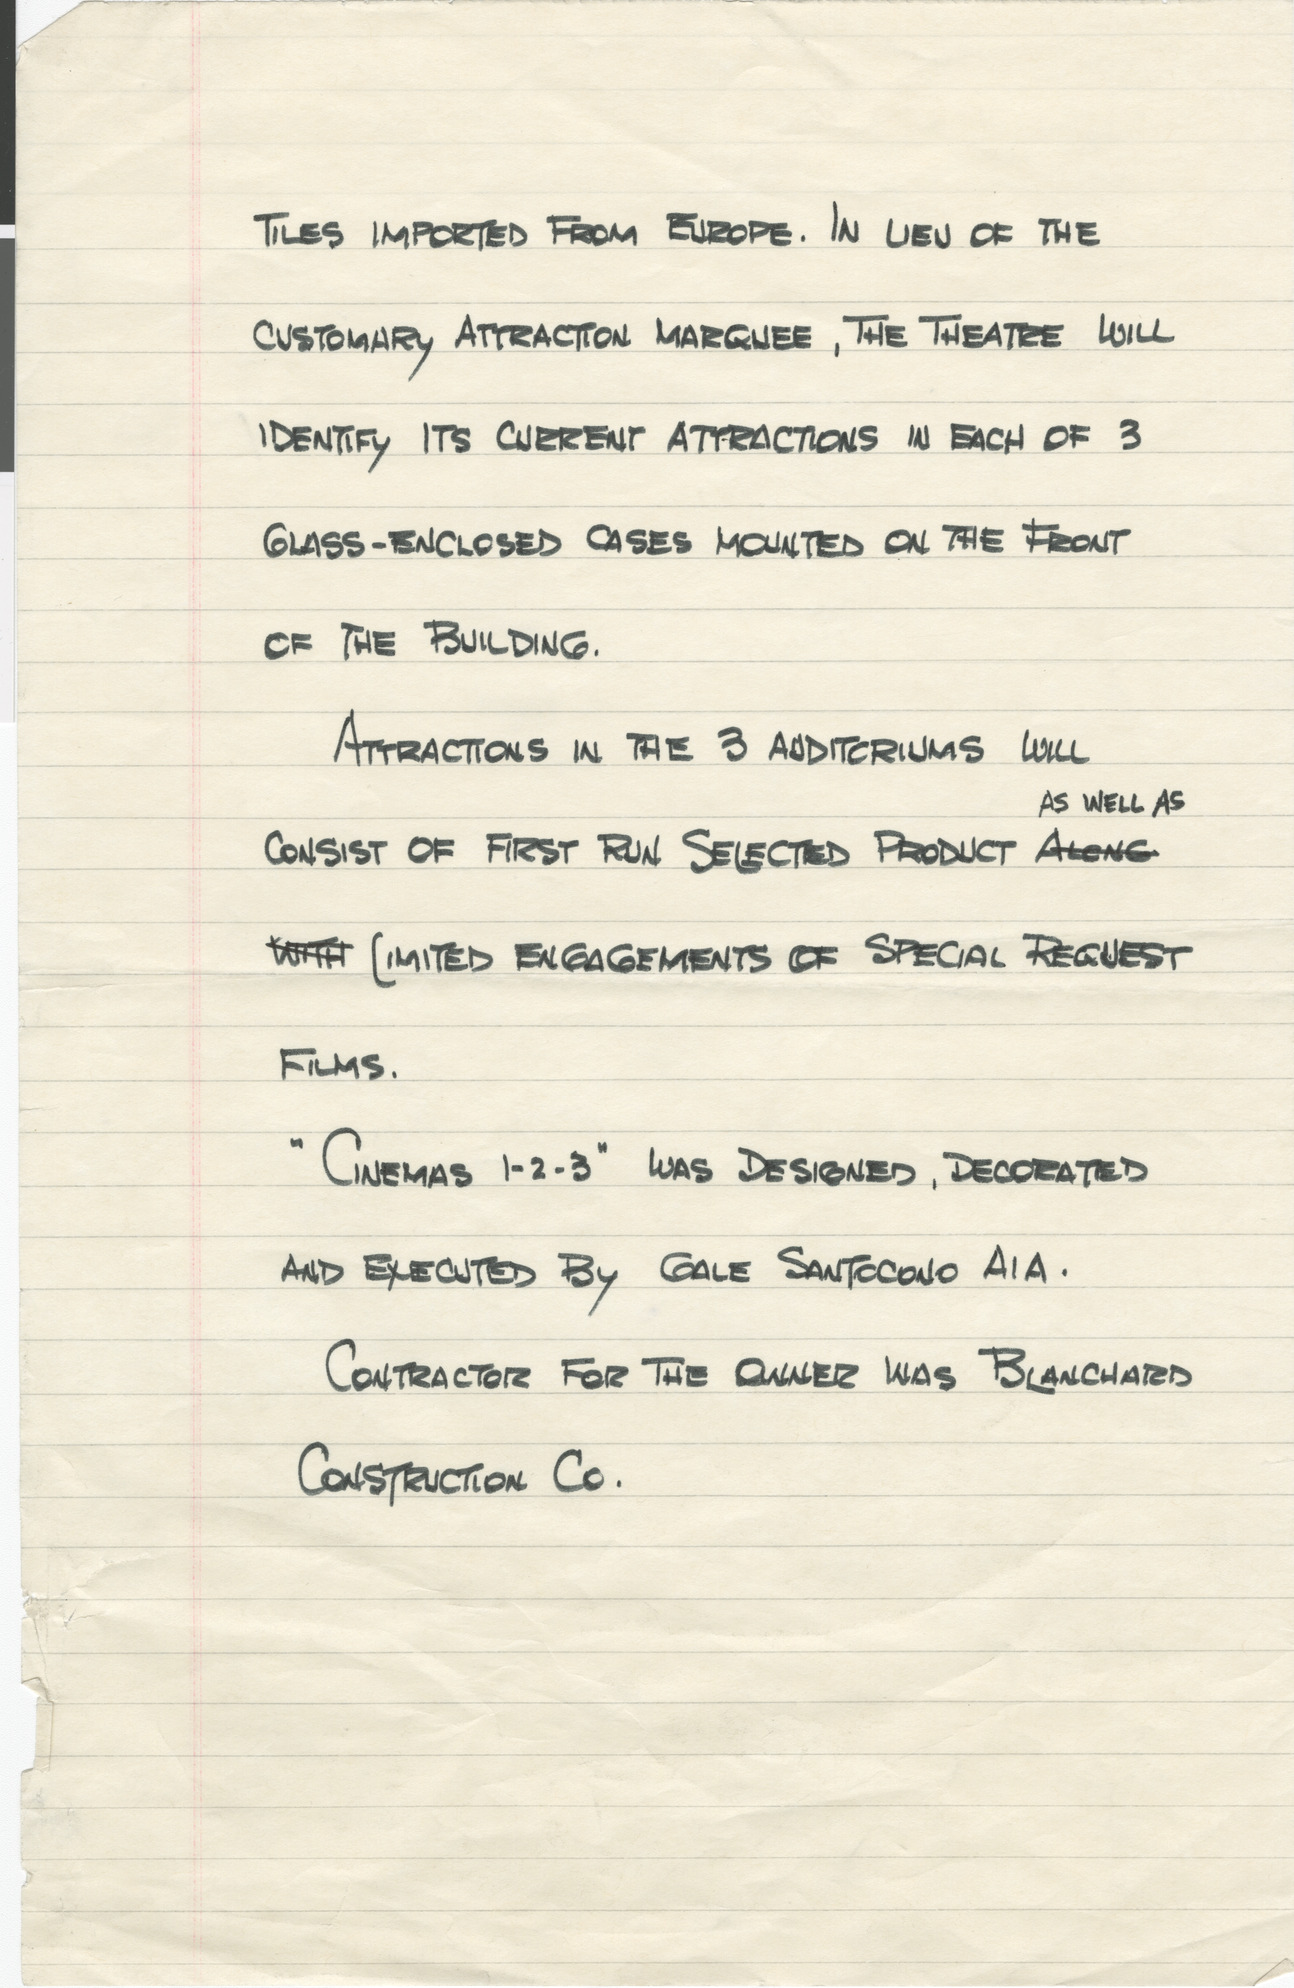 Handwritten press release for opening of Cinemas 1-2-3, page 2